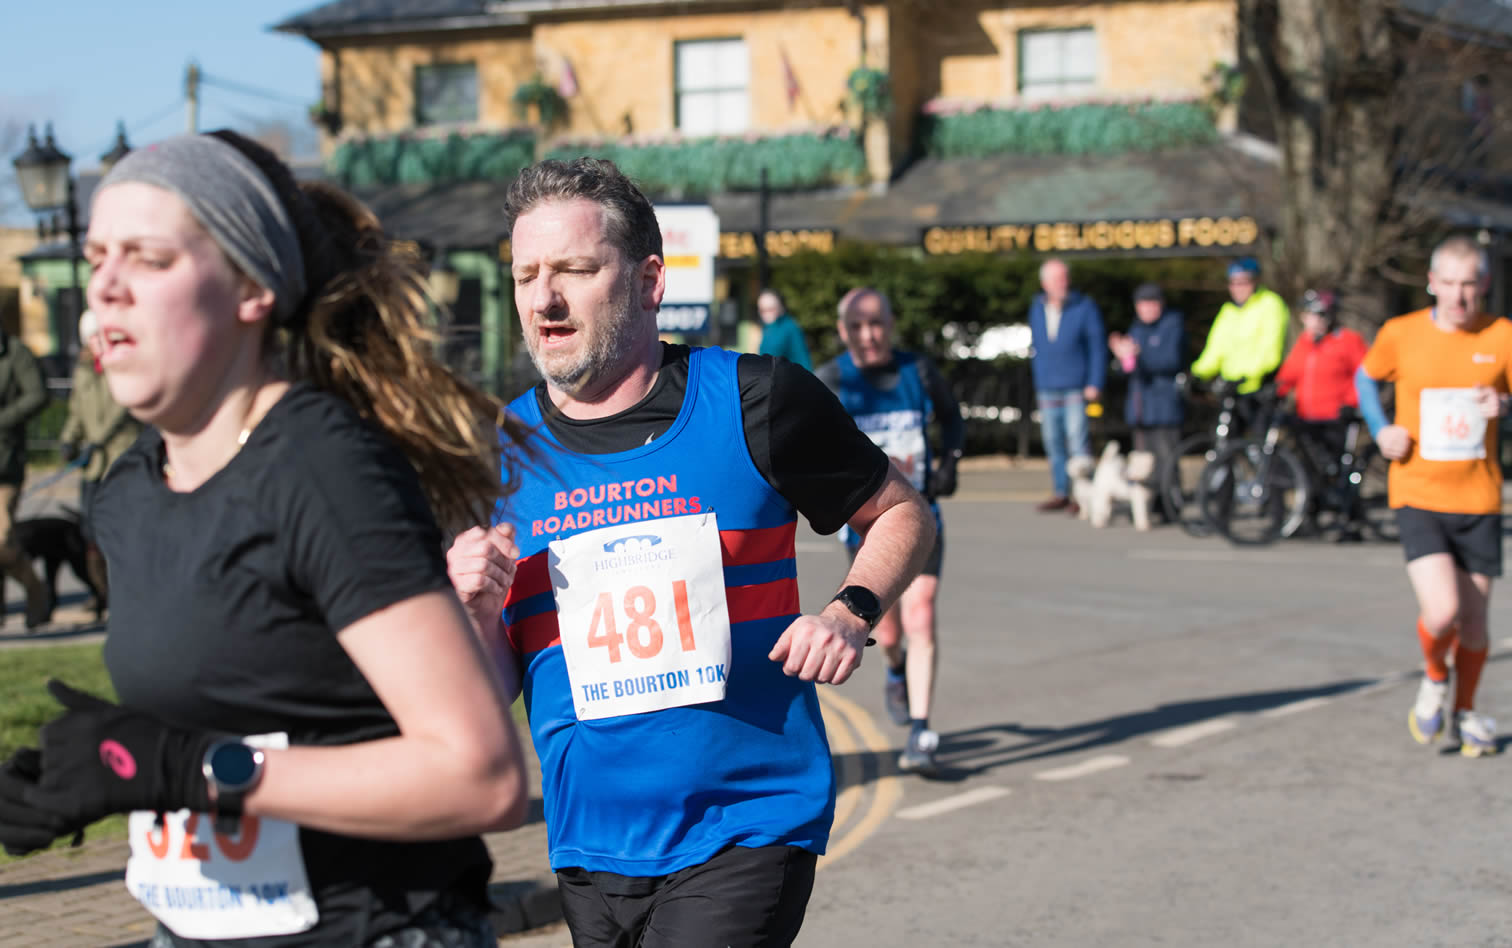 Barry O'leary at Bourton 10k - 27th February 2022